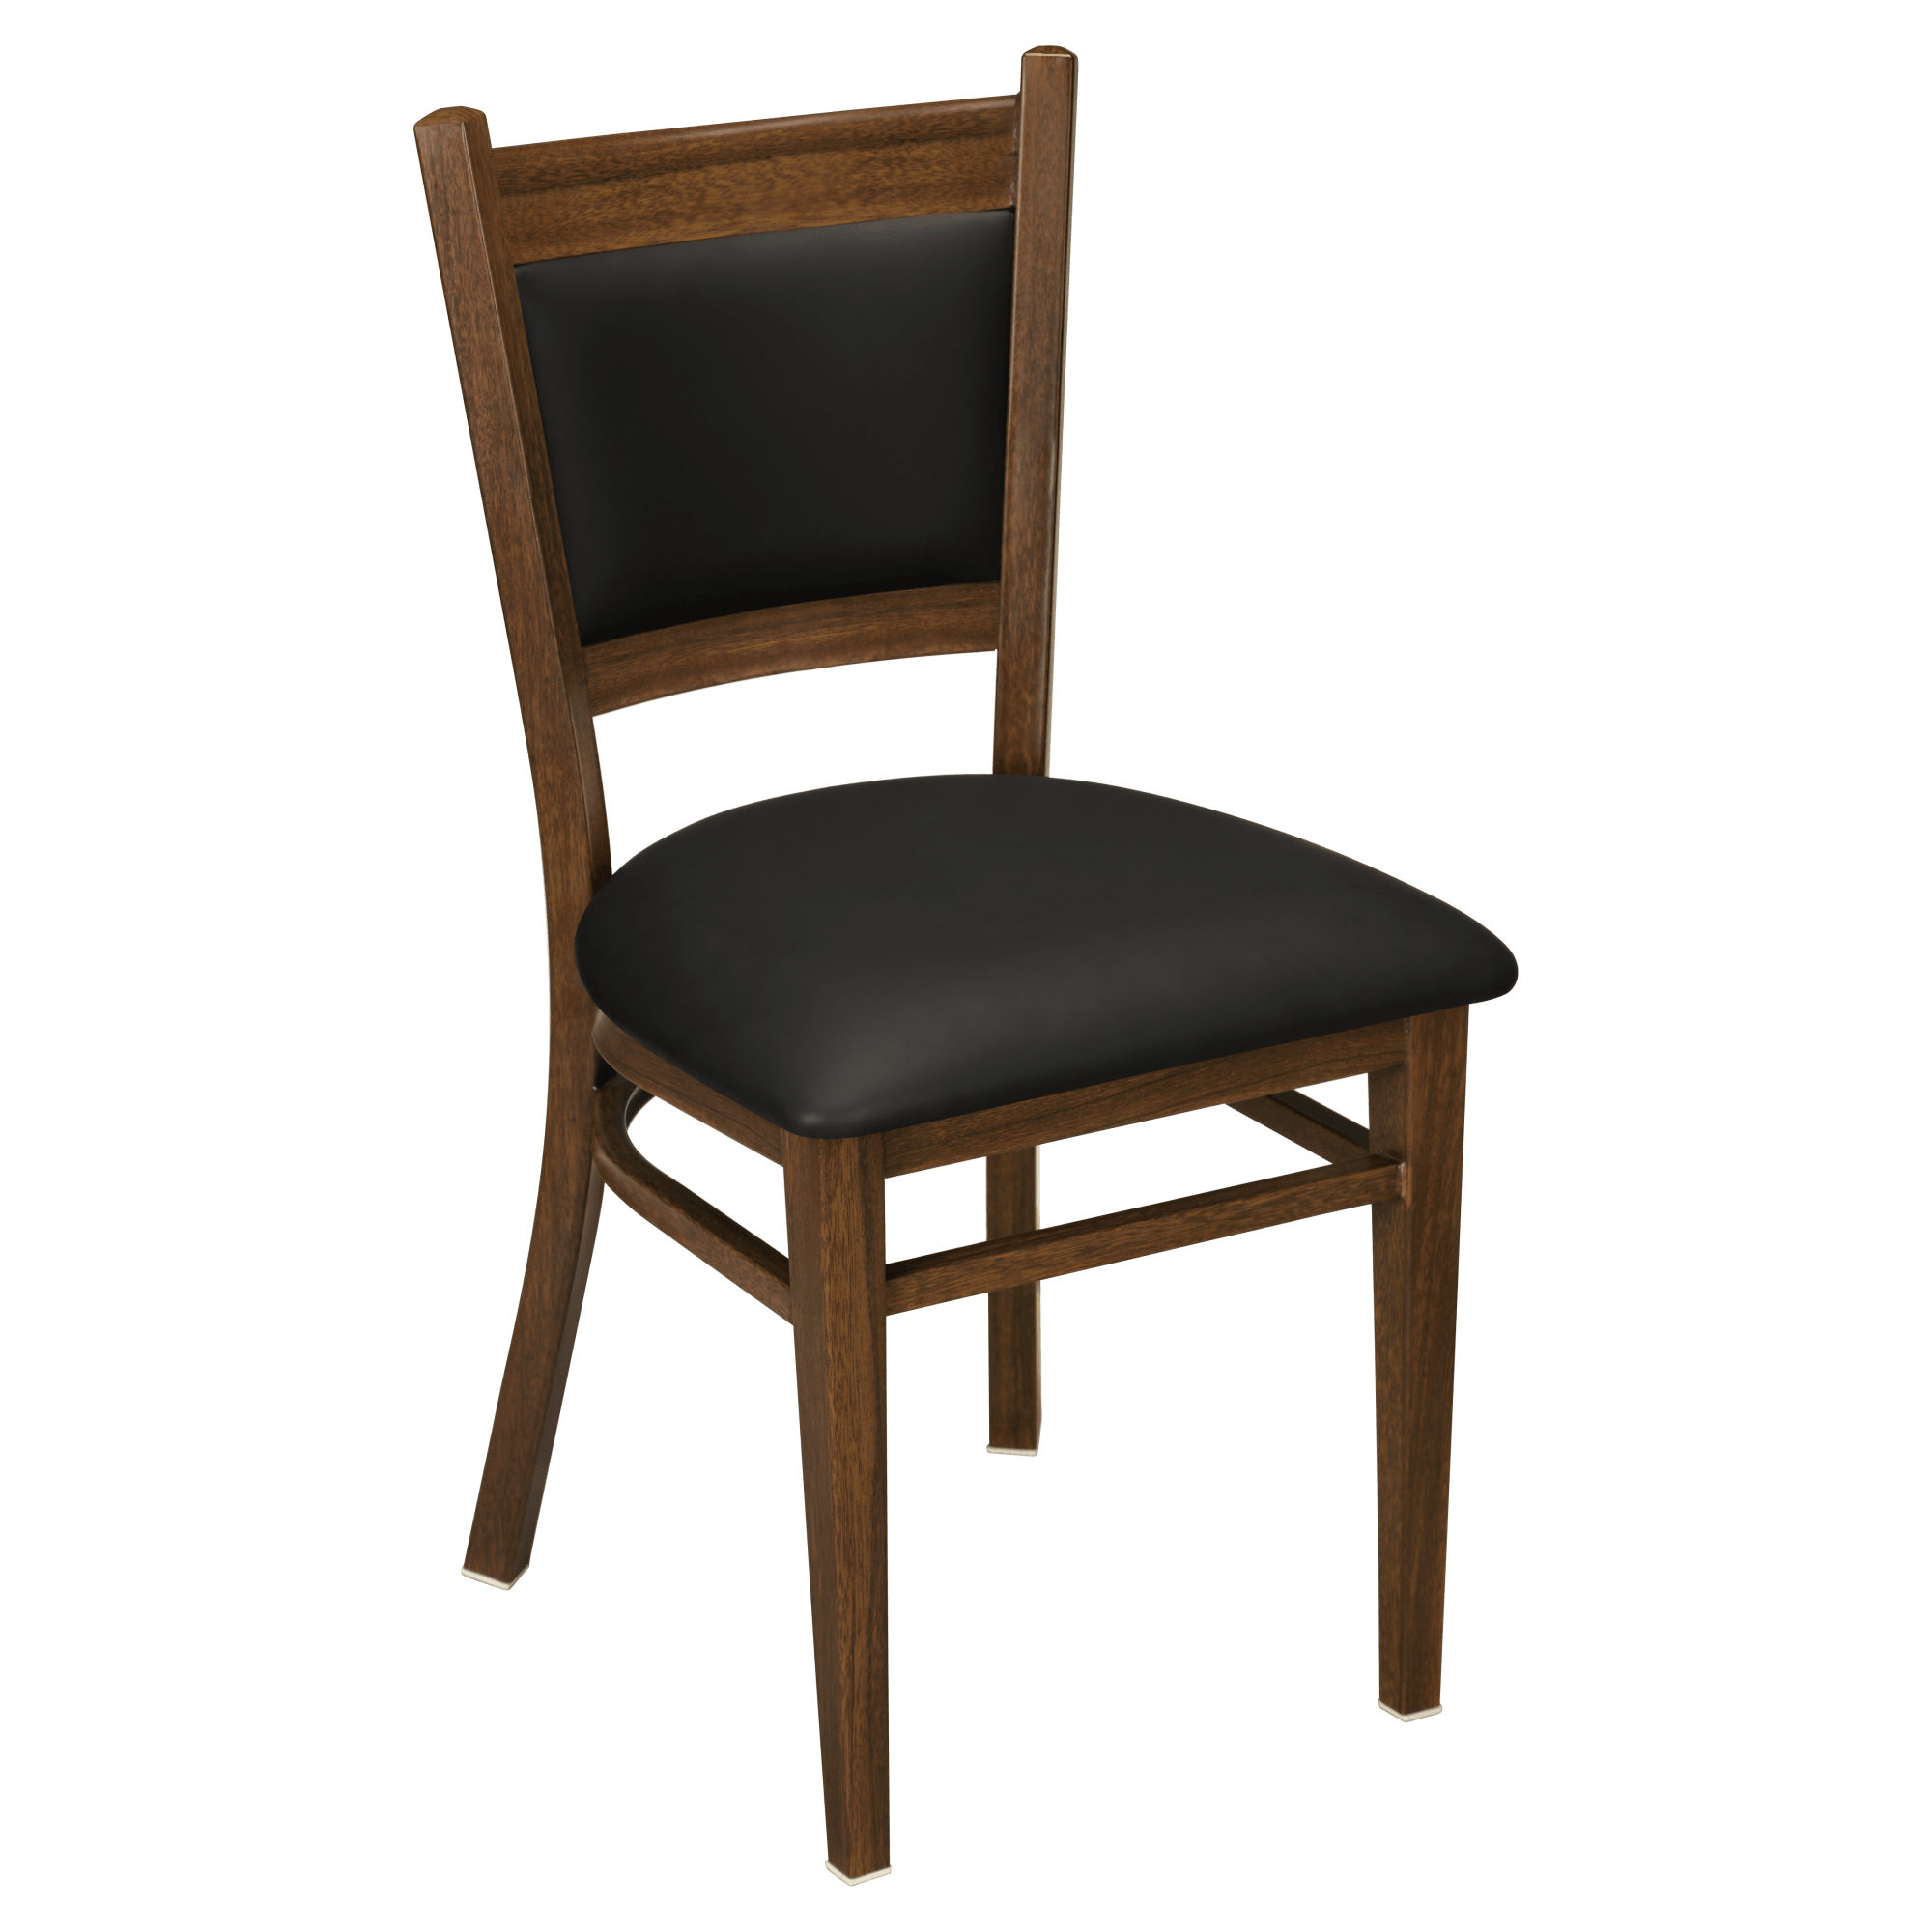 Metal Padded Back Chair with Premium Wood Look Finish with Metal Padded Back Chair with Premium Wood Look Finish